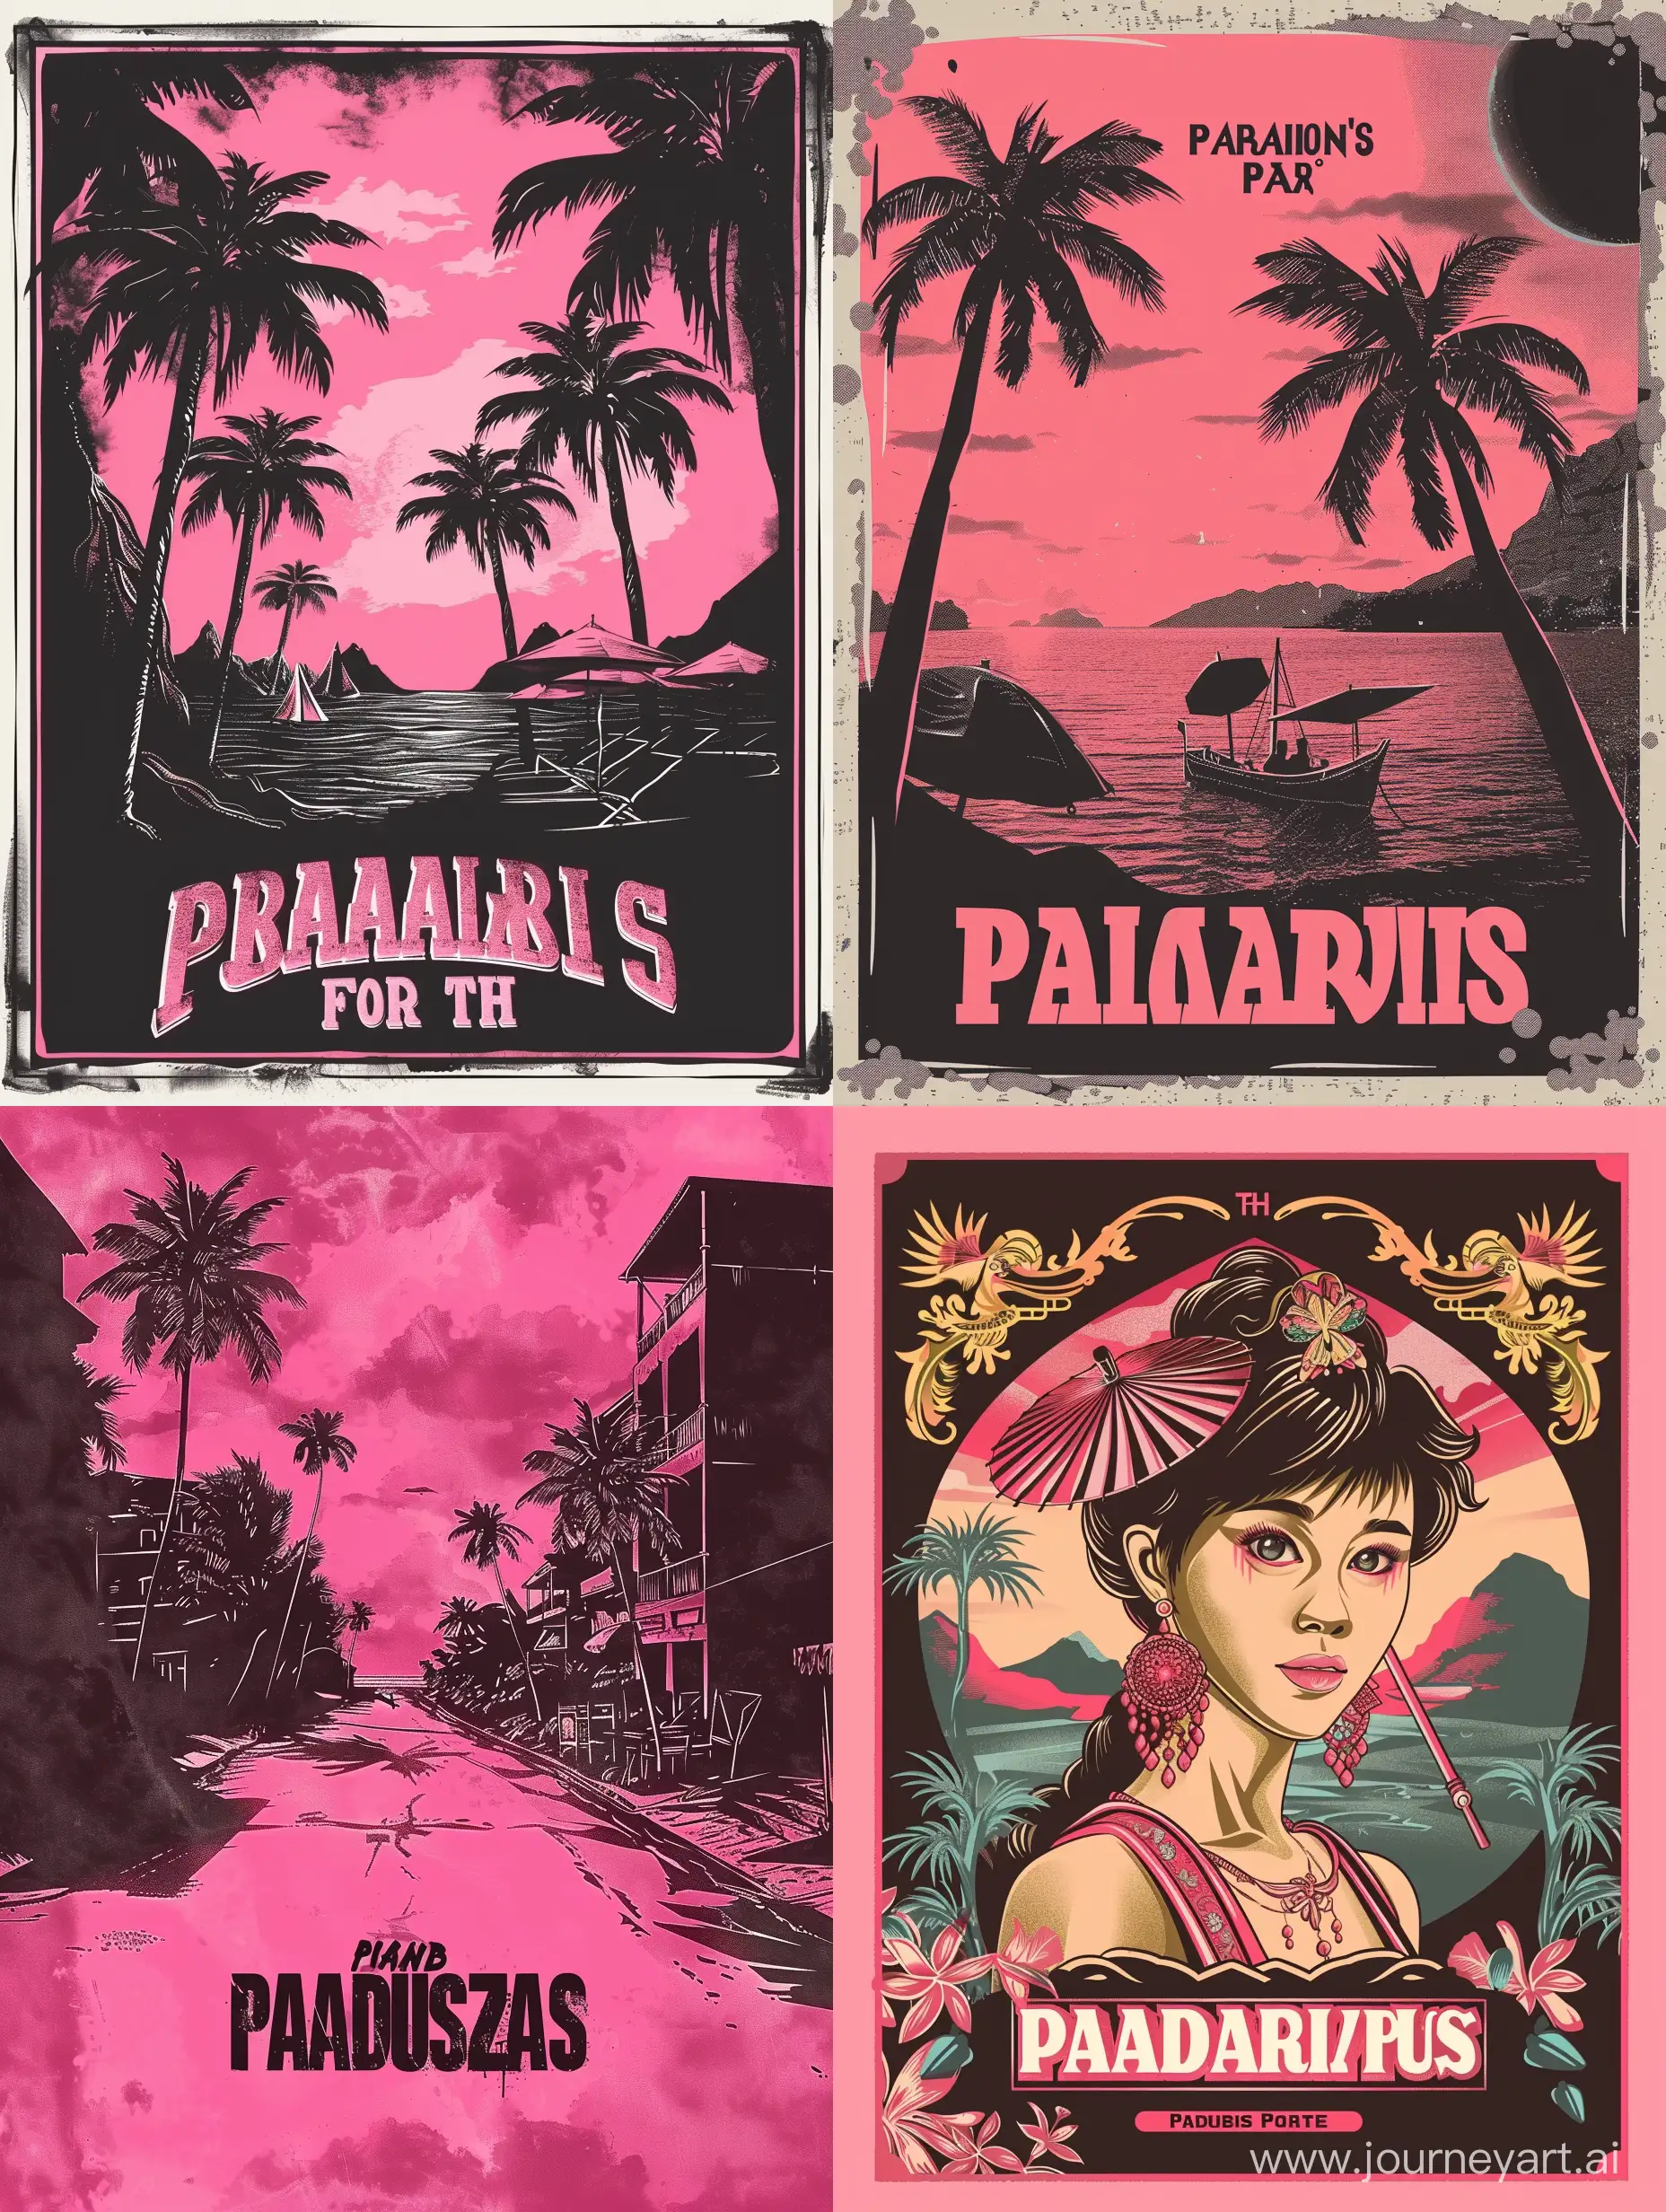 Paradise-Party-Poster-in-Pink-Tones